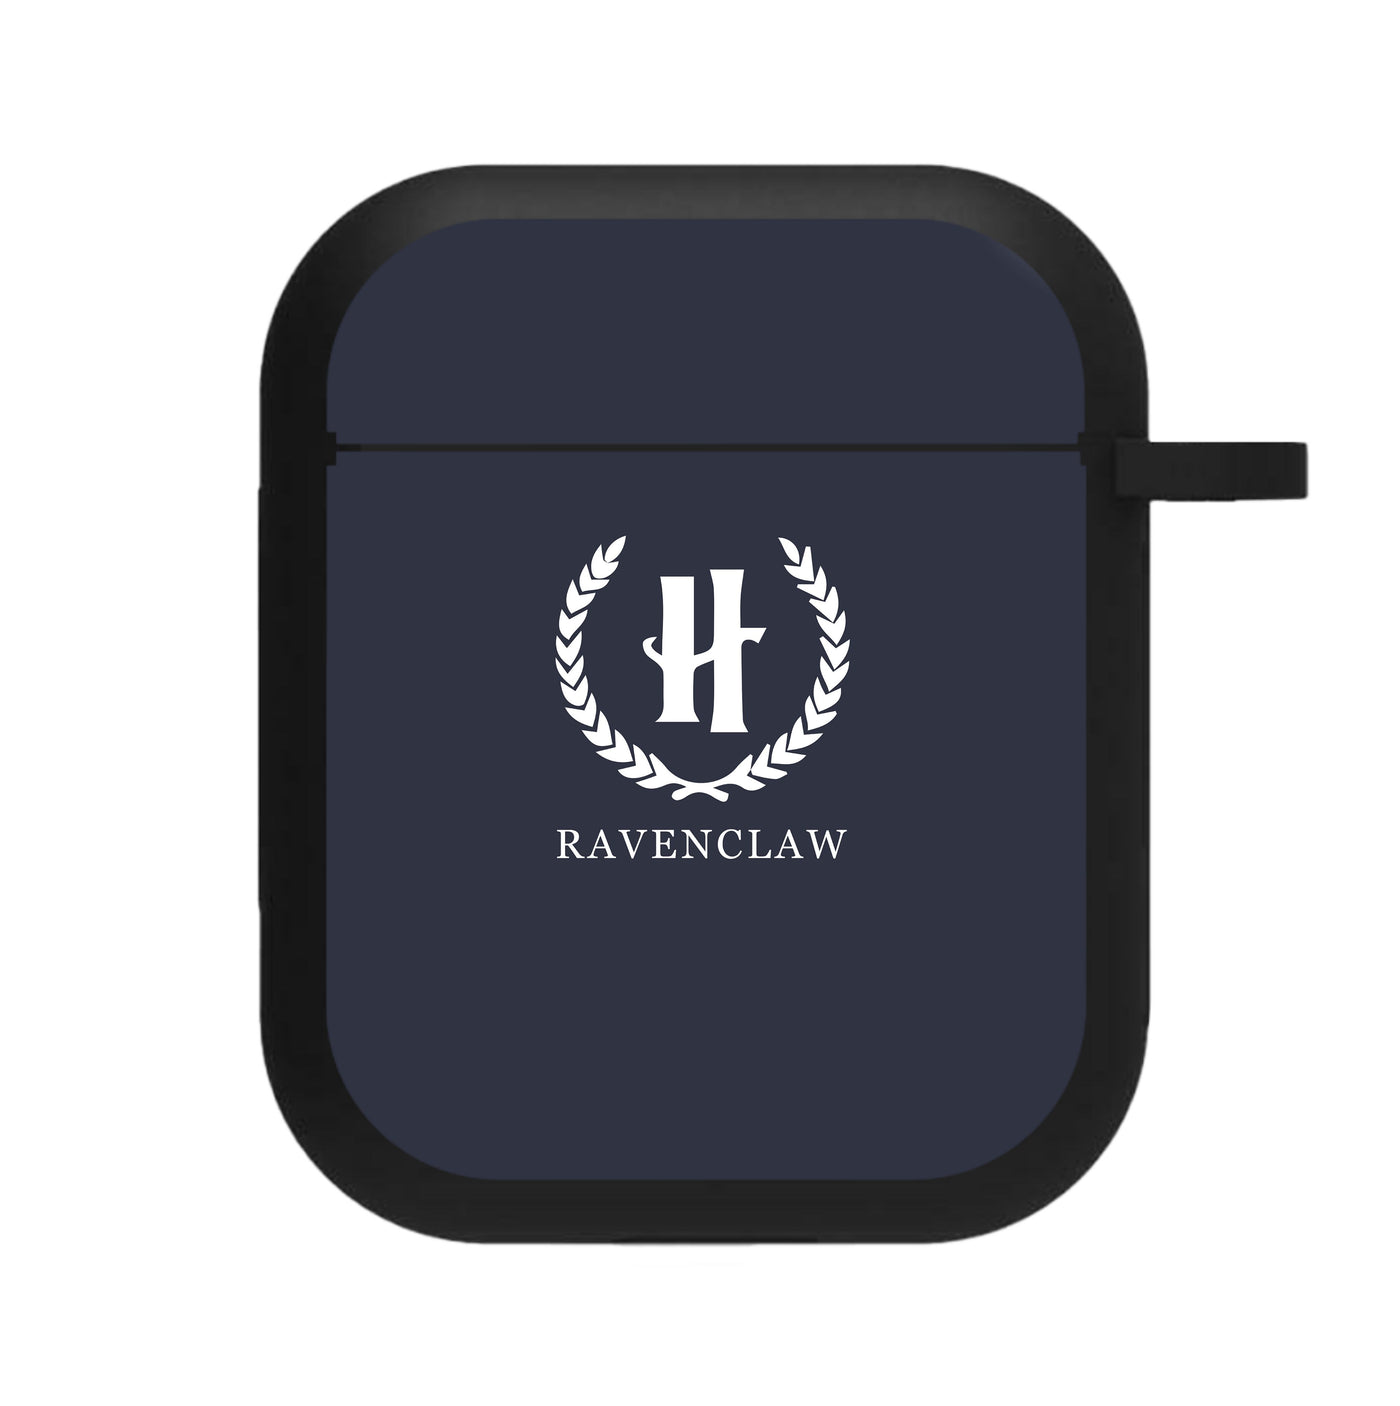 Ravenclaw - Harry Potter AirPods Case